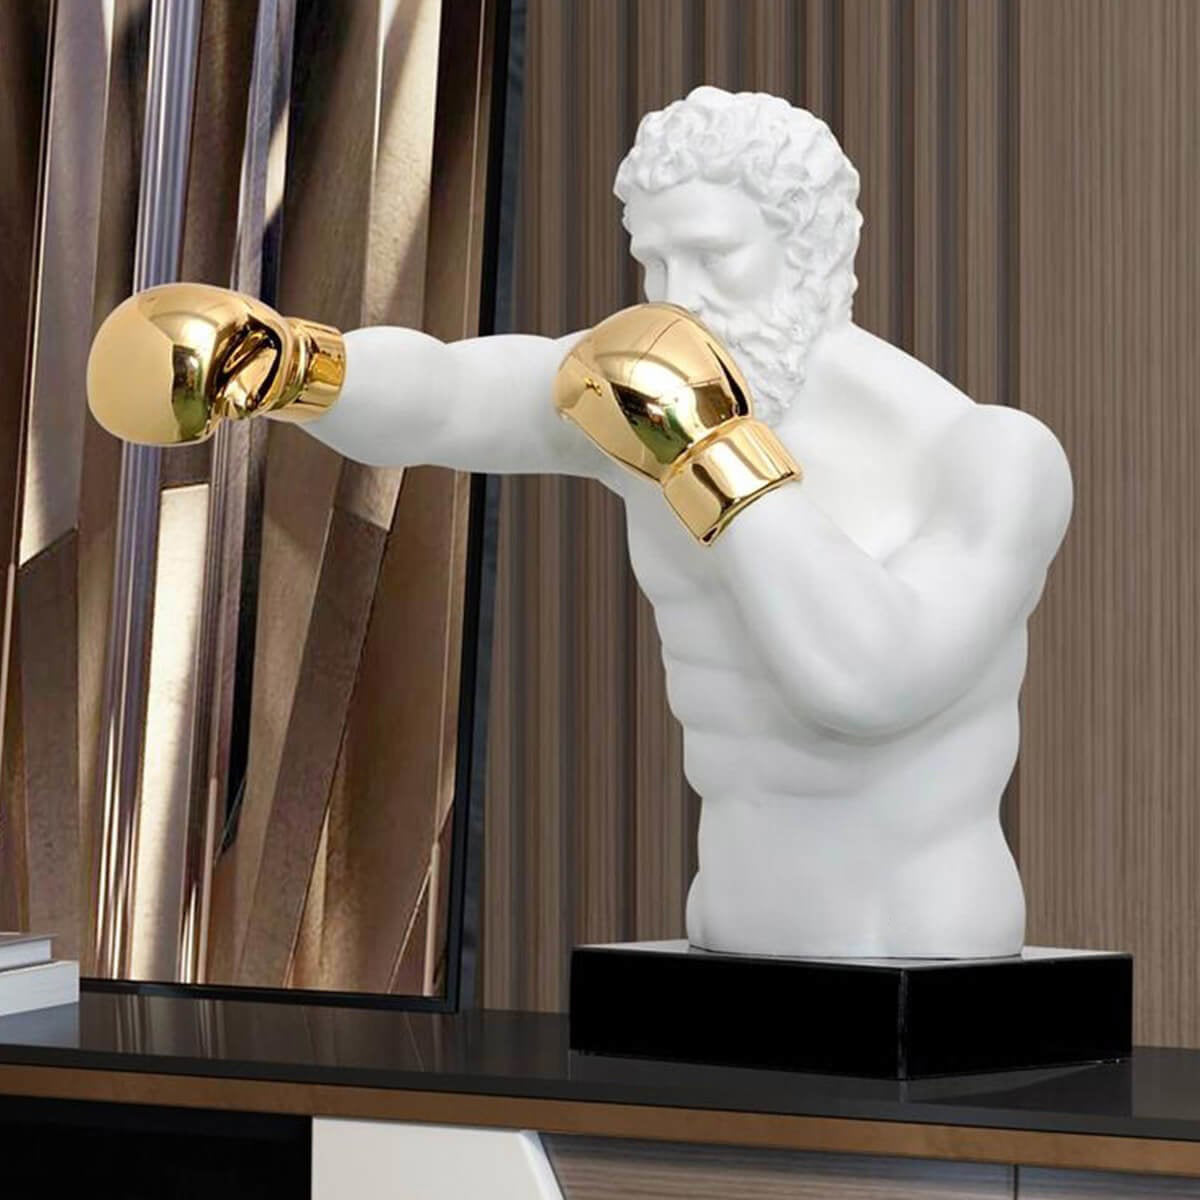 Greek Boxing Statue - Fighter Sculpture with Golden Gloves